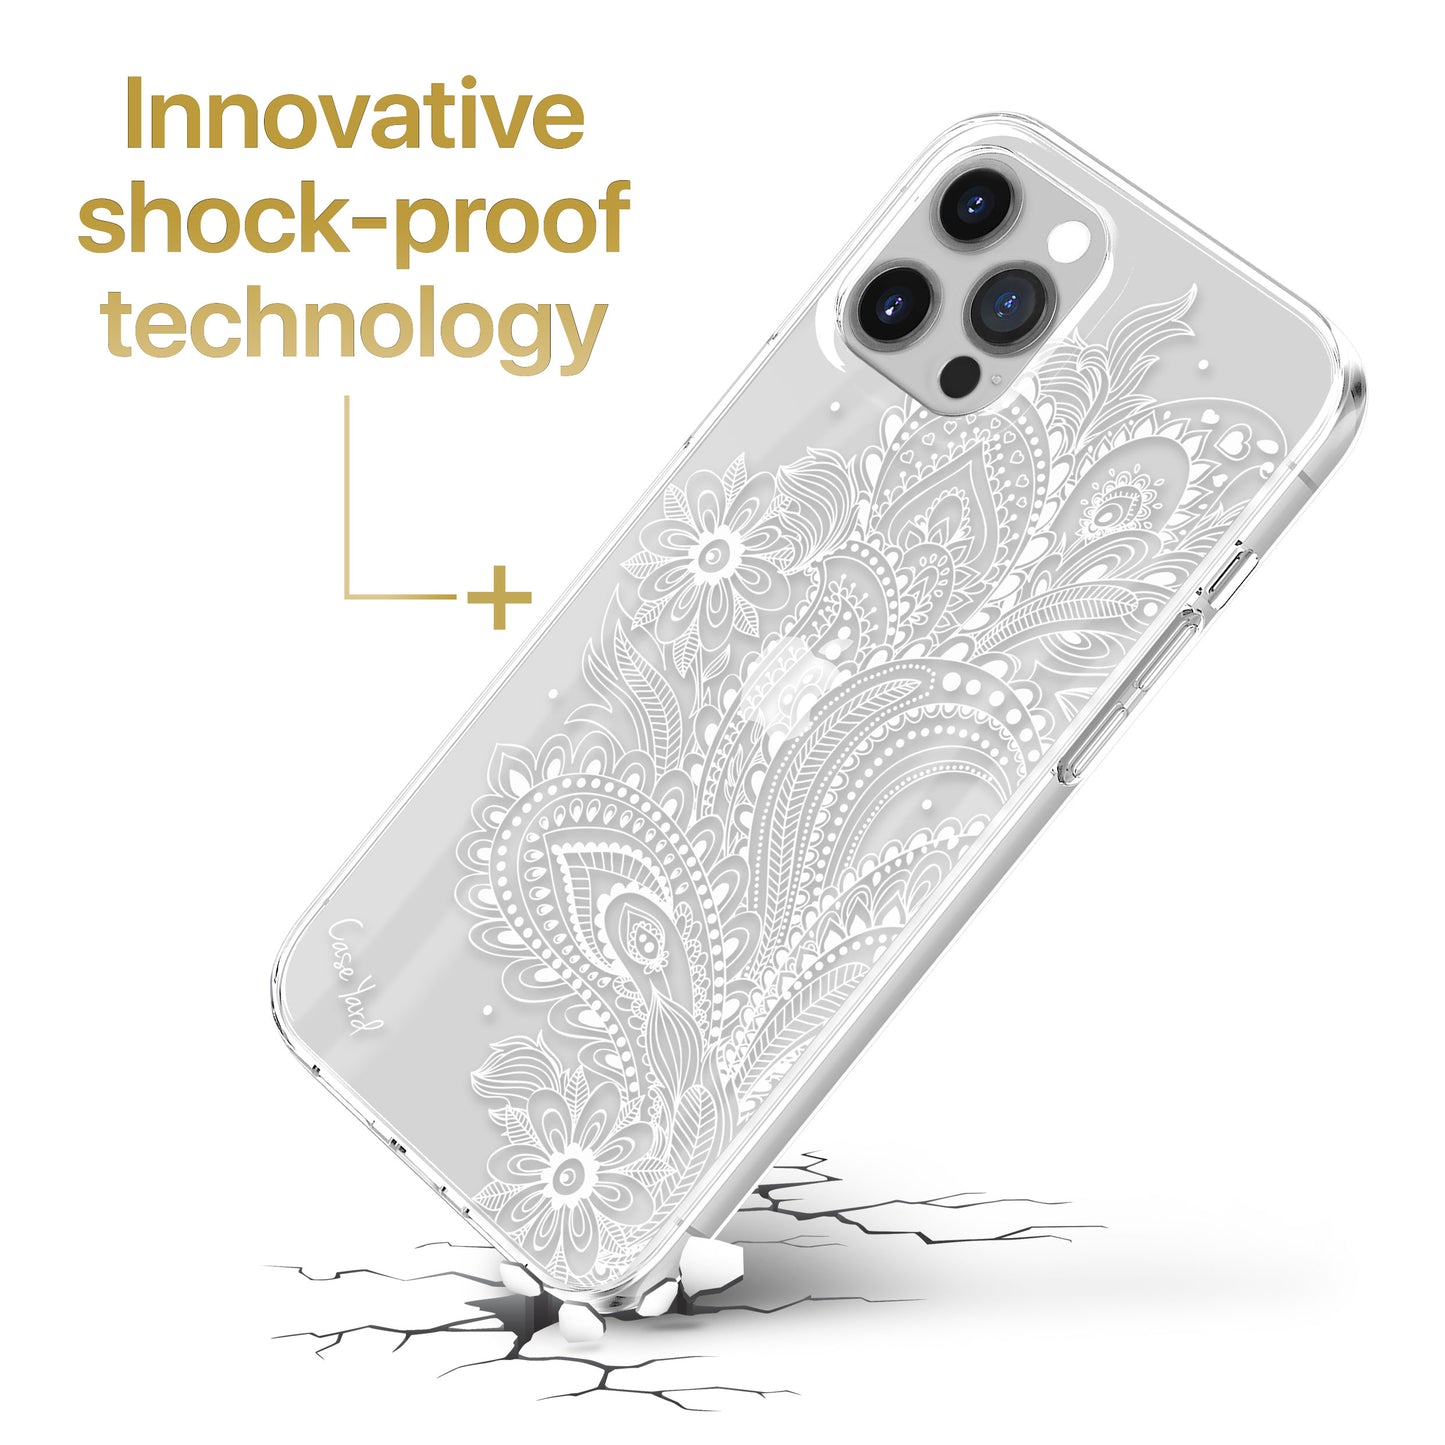 TPU Case Clear case with (Flower Paisley) Design for iPhone & Samsung Phones